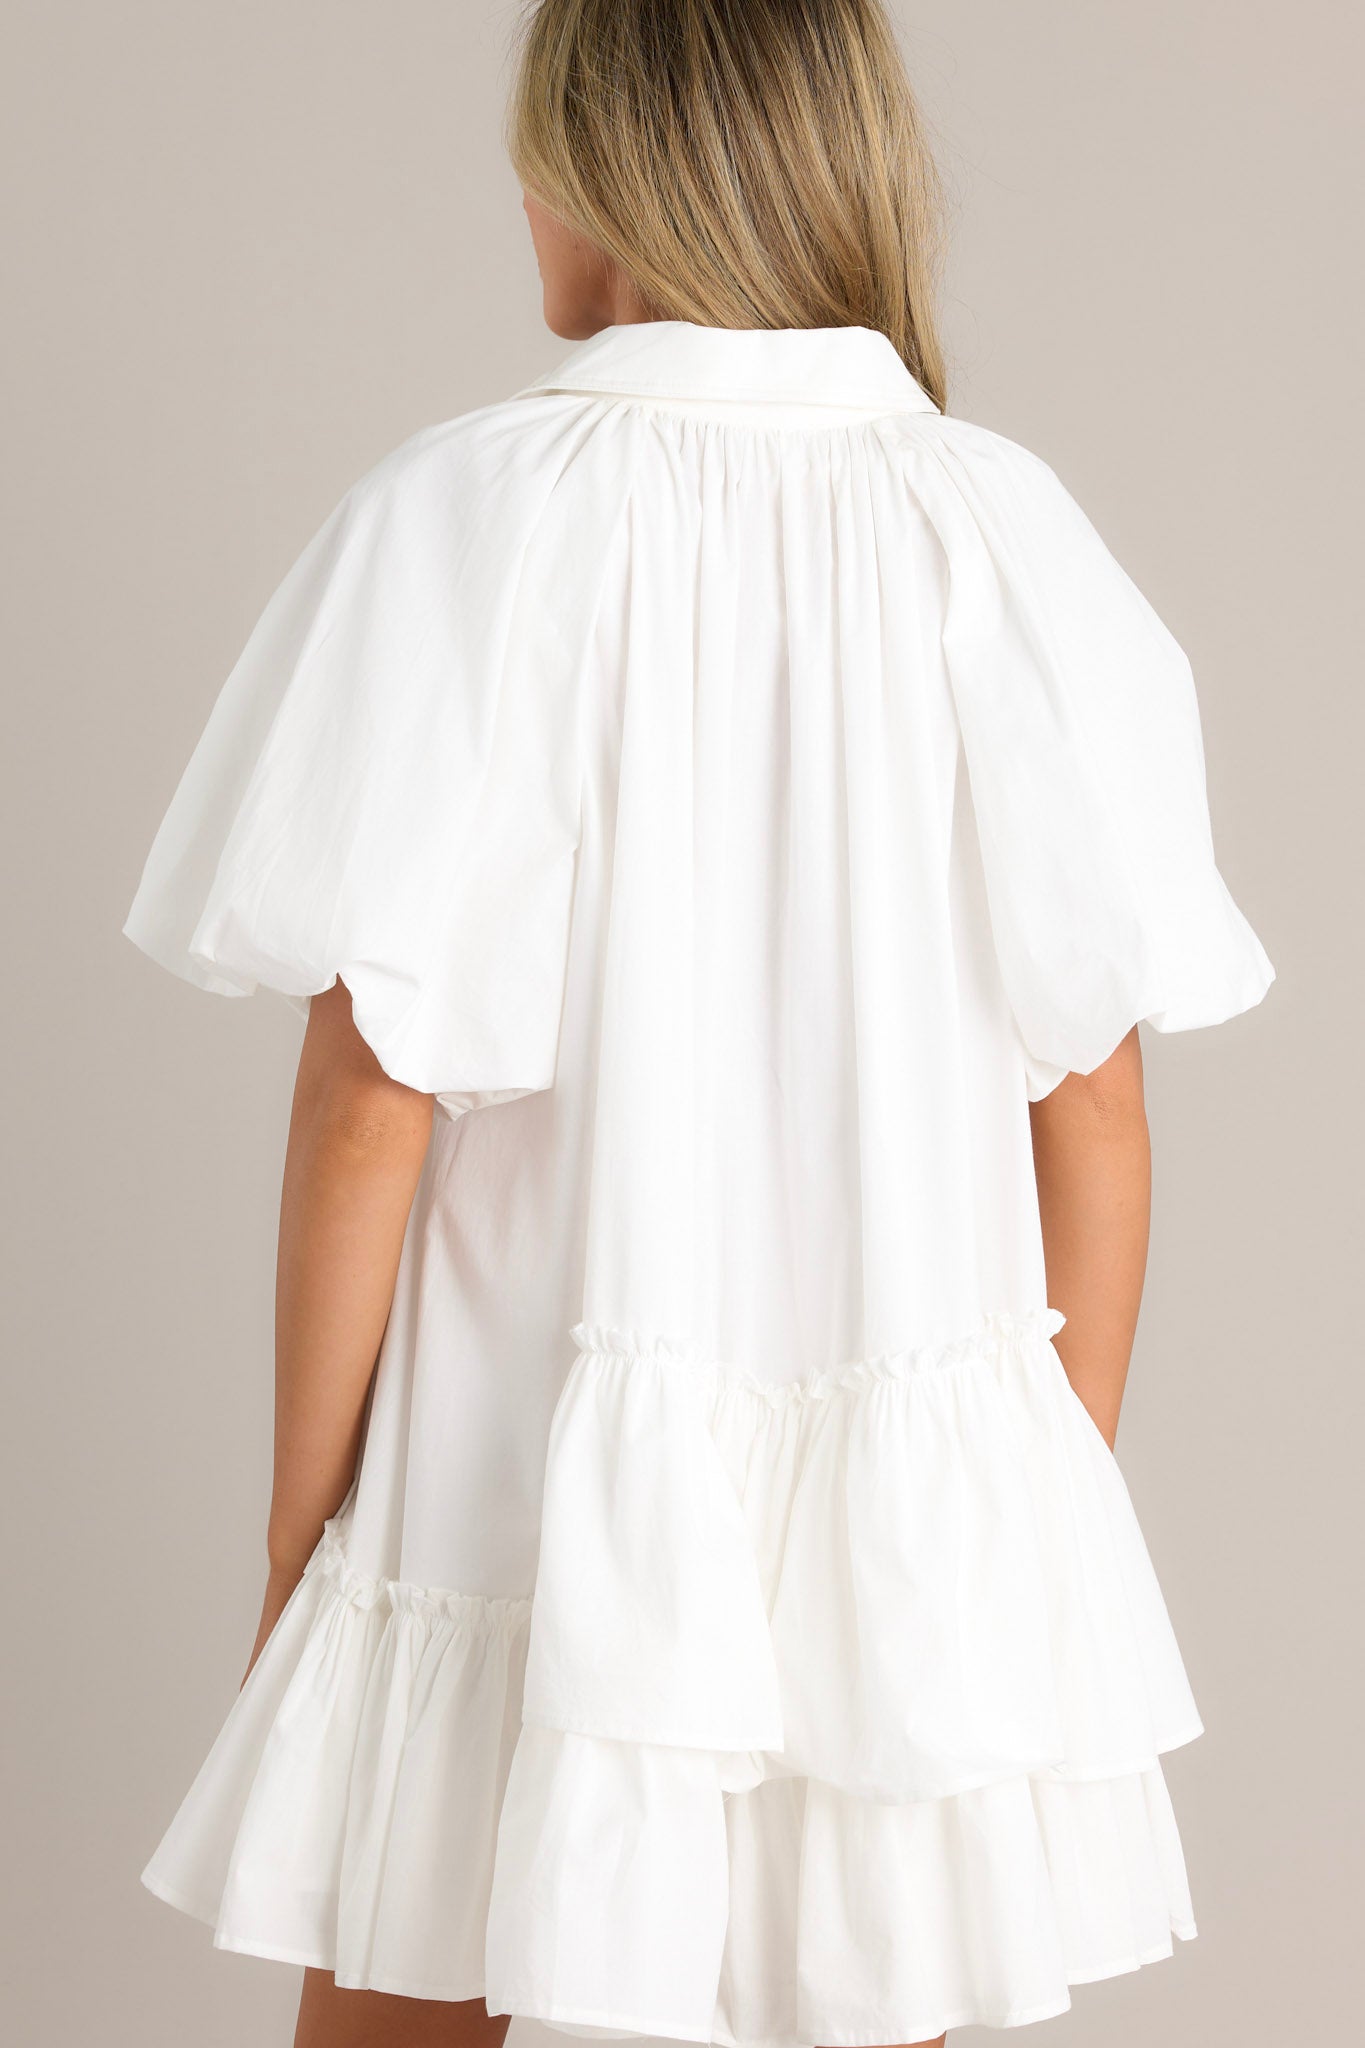 Back view of this White mini dress with a collared neckline, button-up front, and short puff sleeves. The dress has a tiered, ruffled skirt, giving it a playful and chic style.